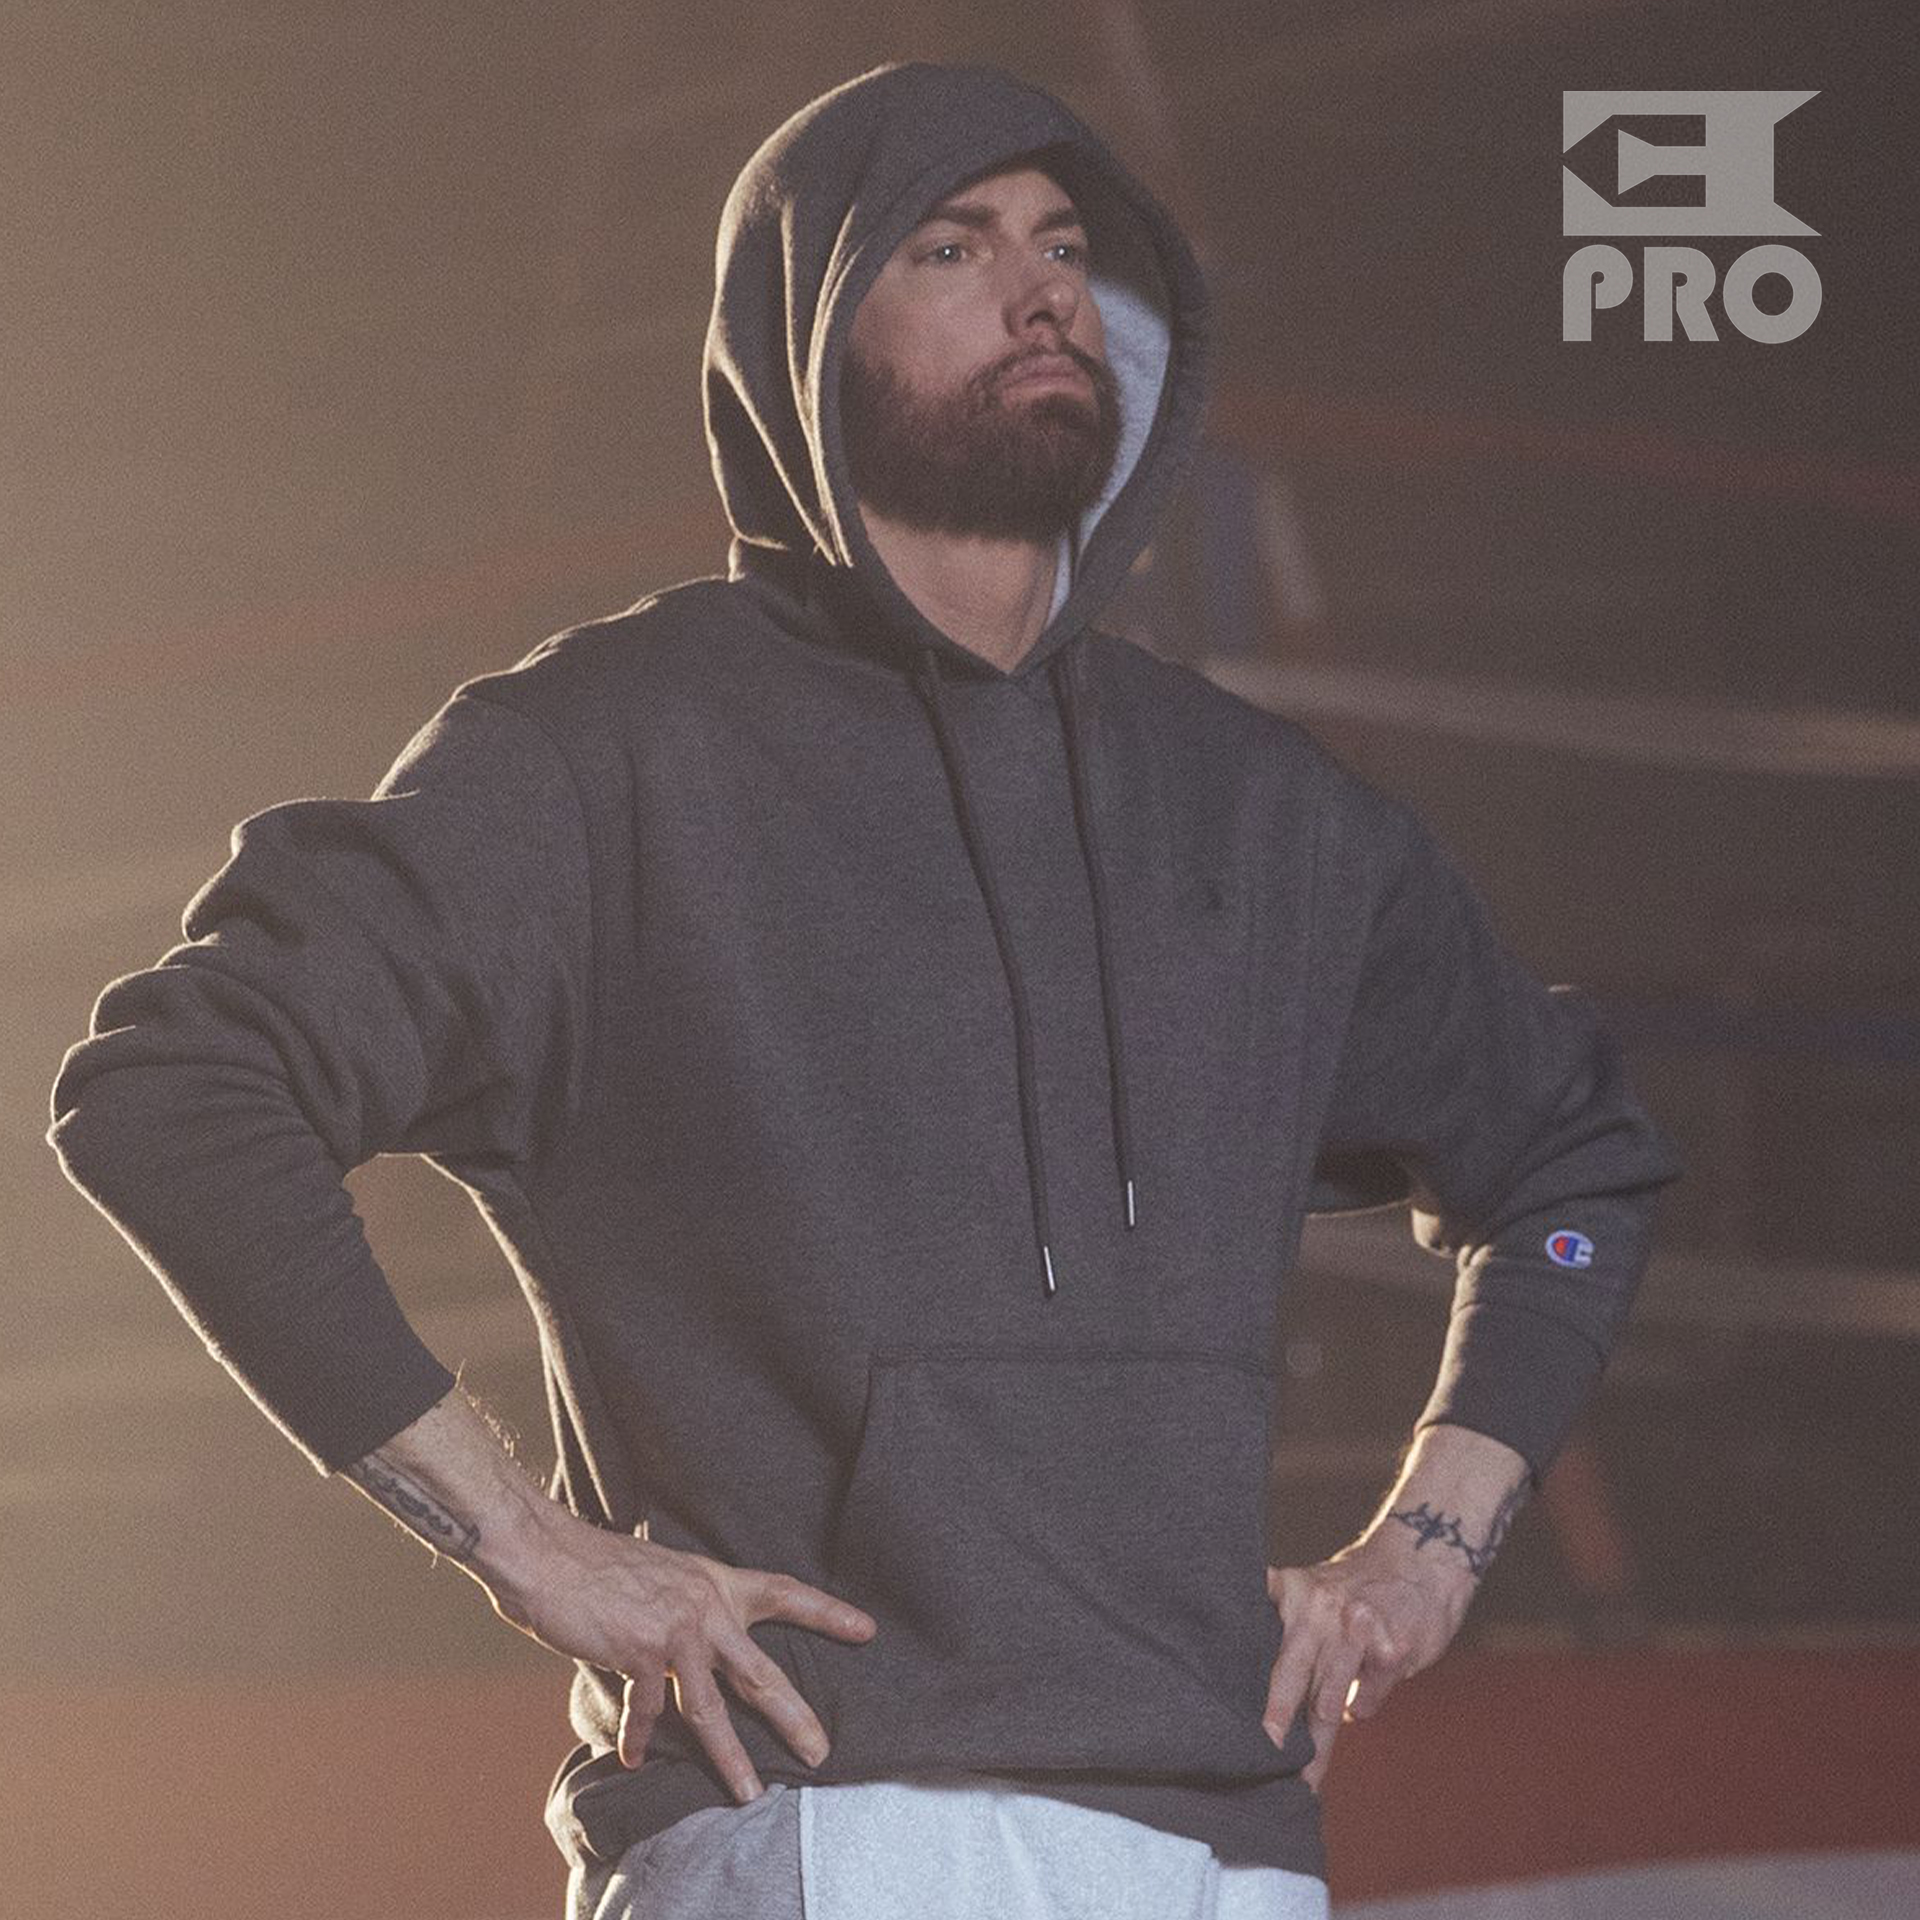 Hi-Res Backstage Photos From Eminem’s “Higher” Video (Exclusive)